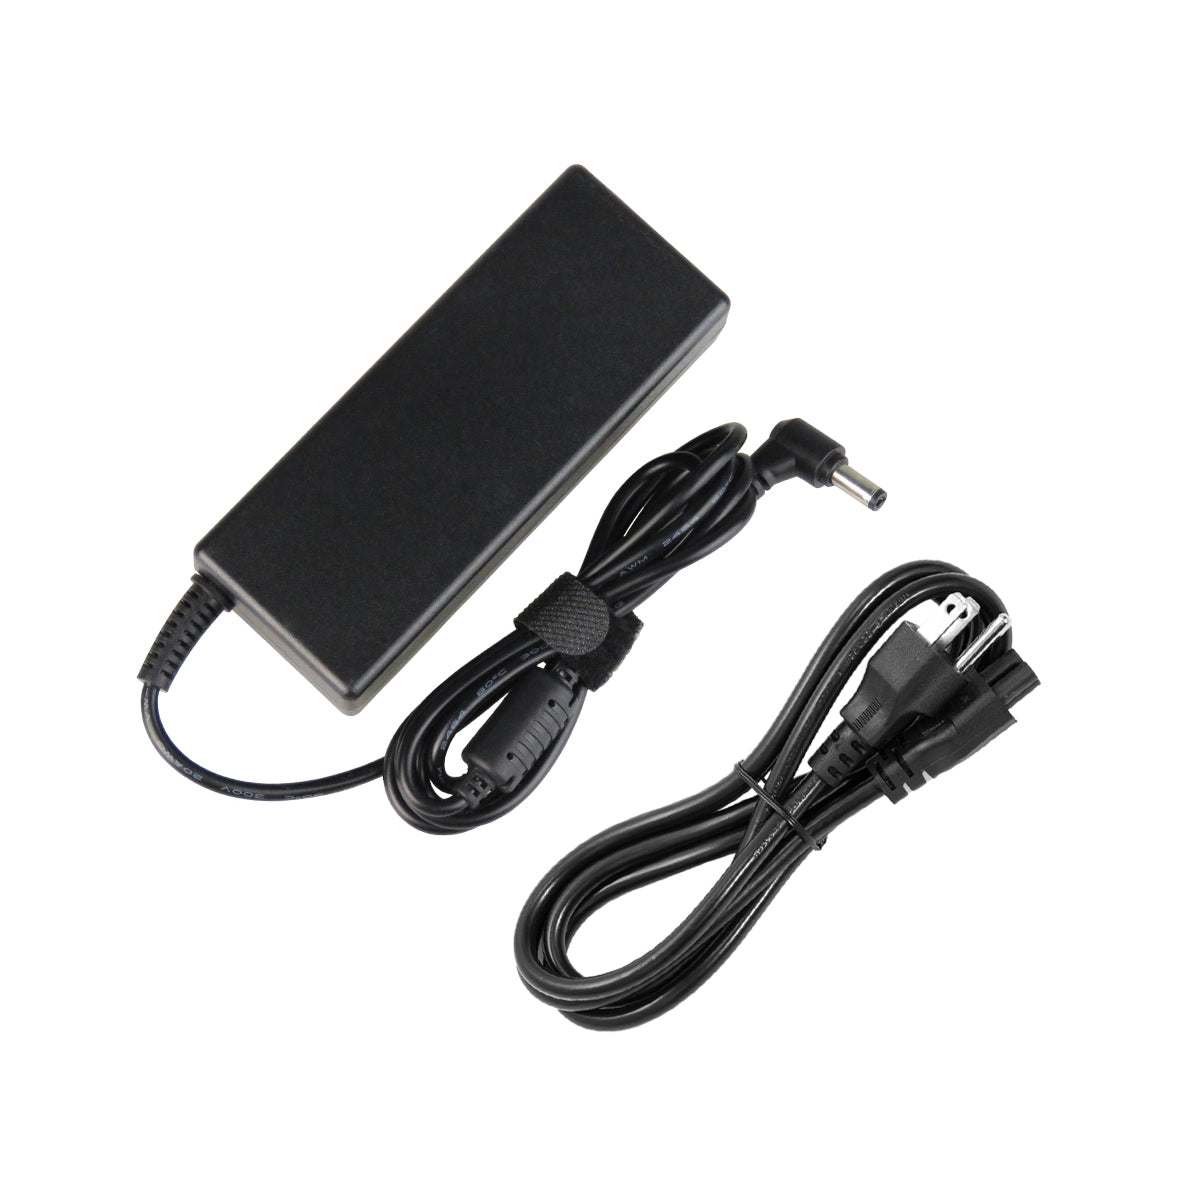 AC Adapter Charger for Toshiba Satellite c55-a5300 Notebook.